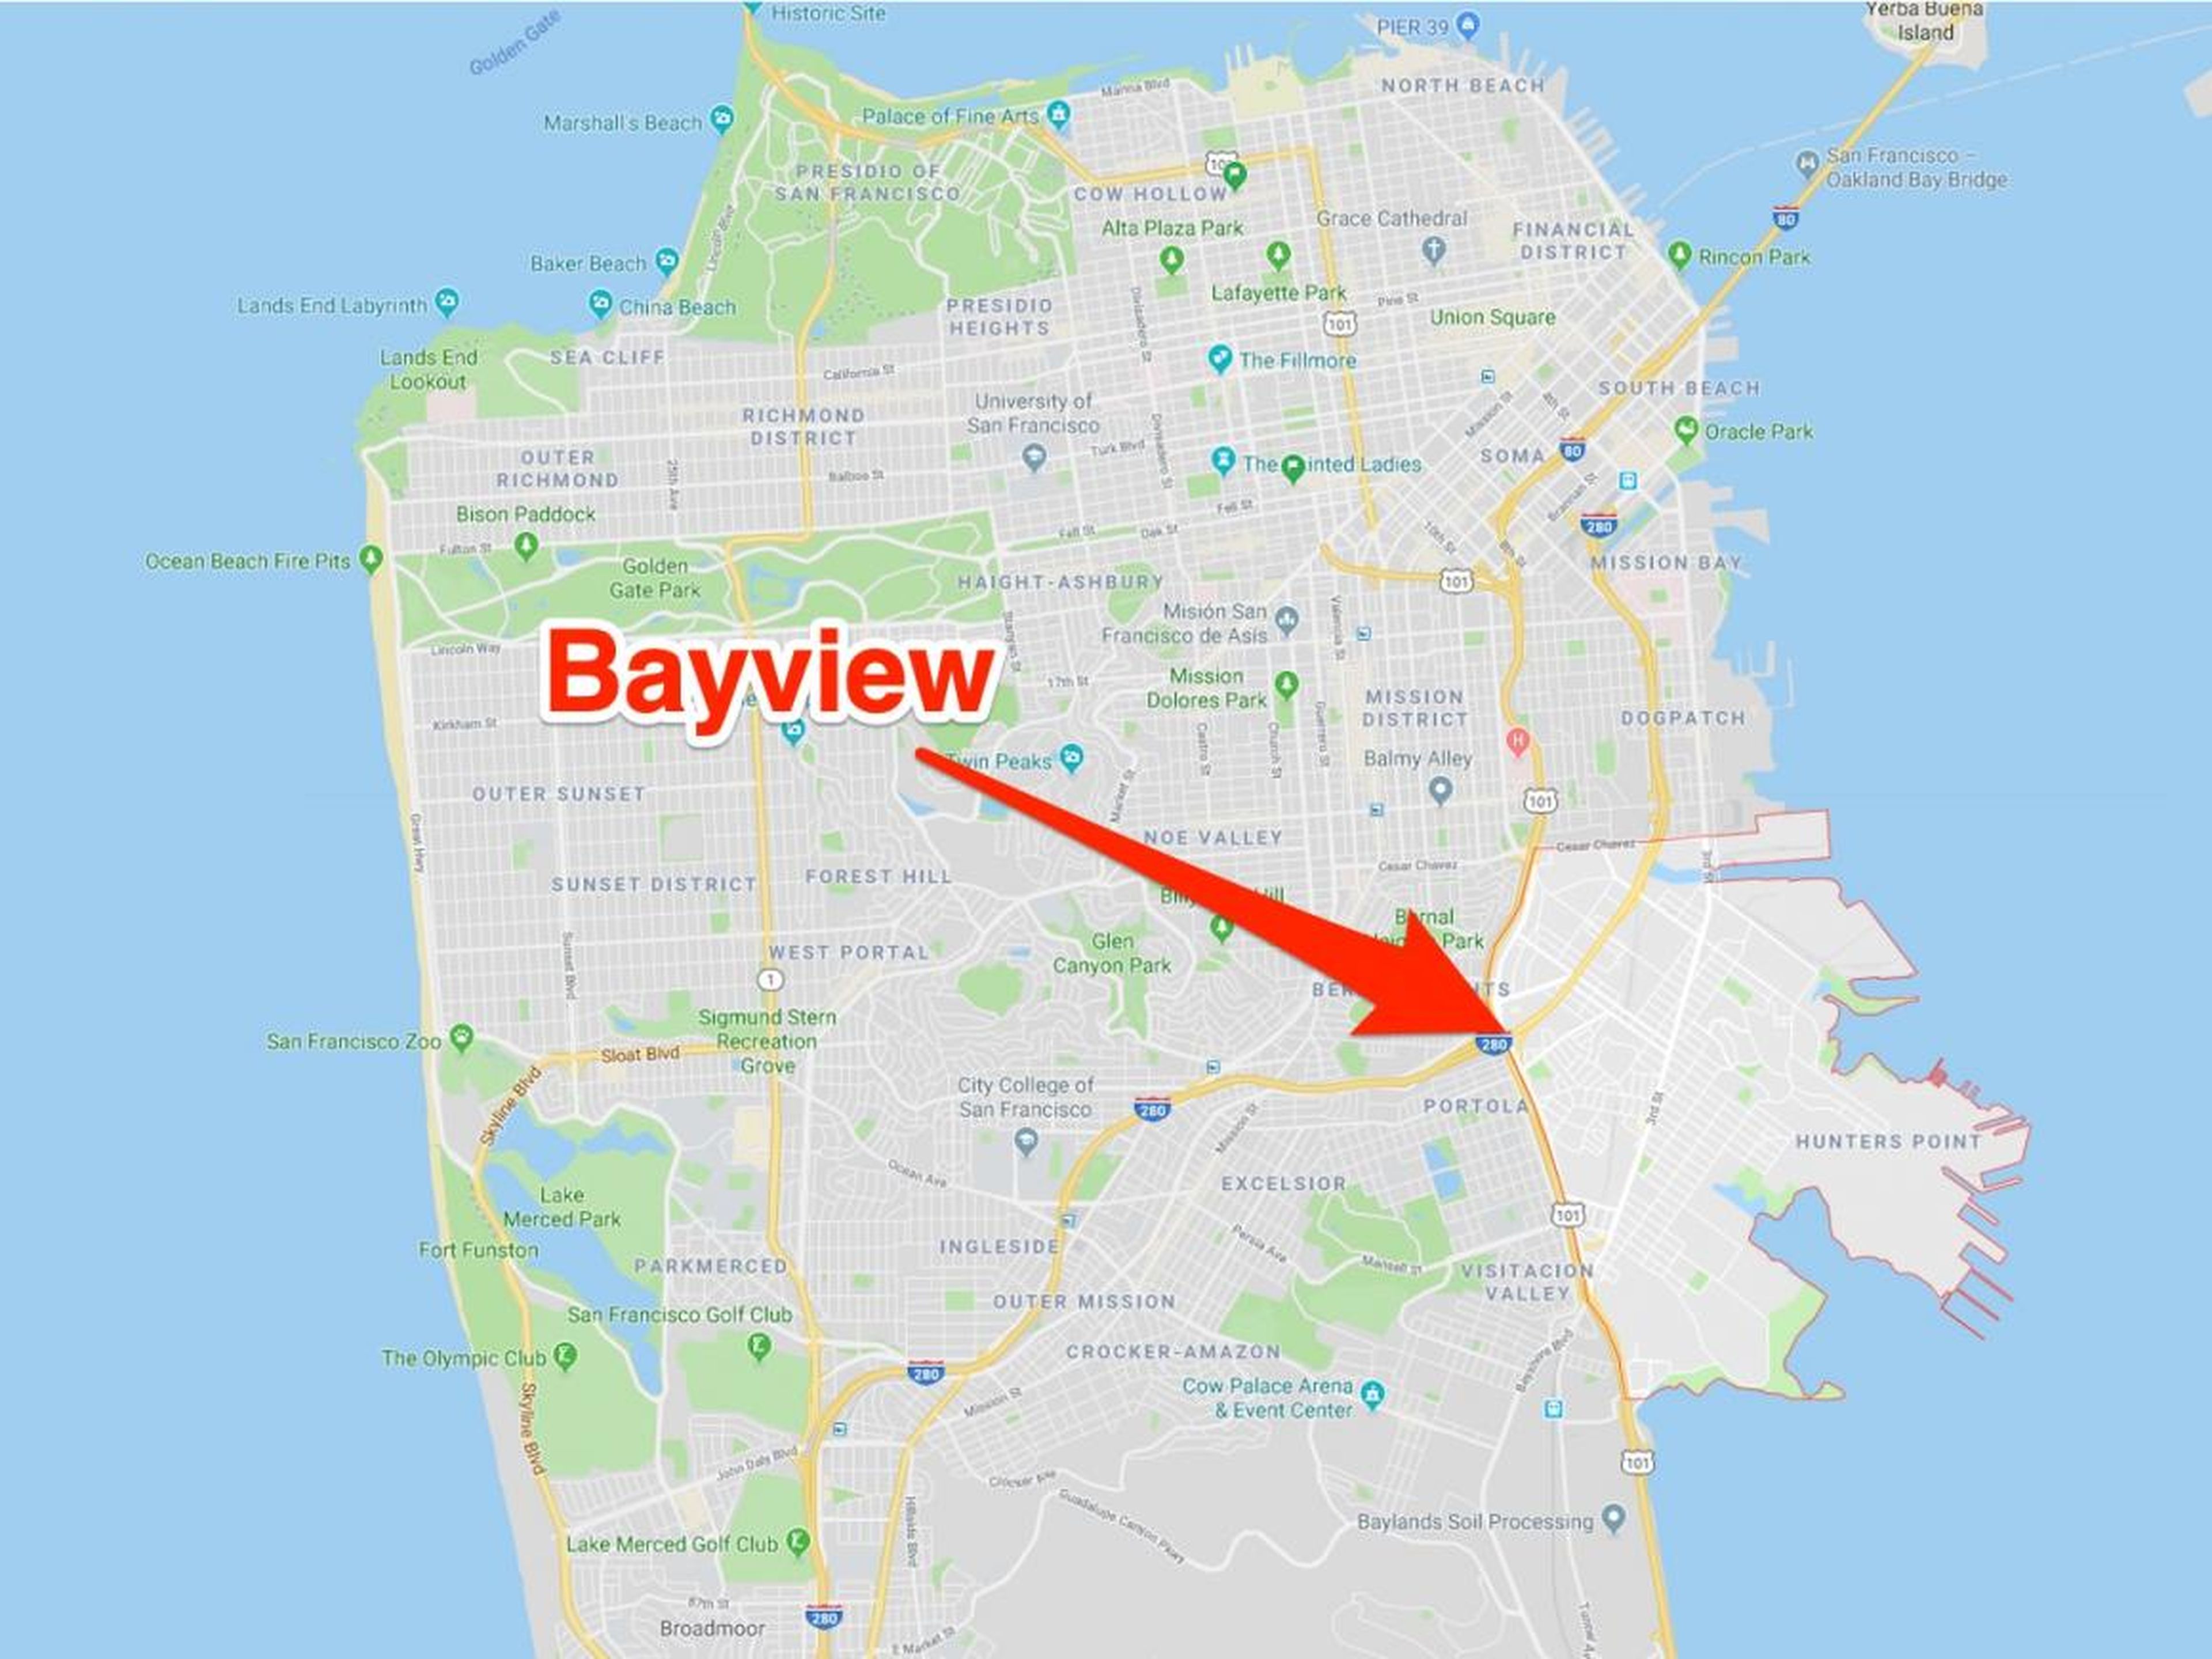 It sits in Bayview, one of San Francisco’s southernmost neighborhoods that fronts the bay.